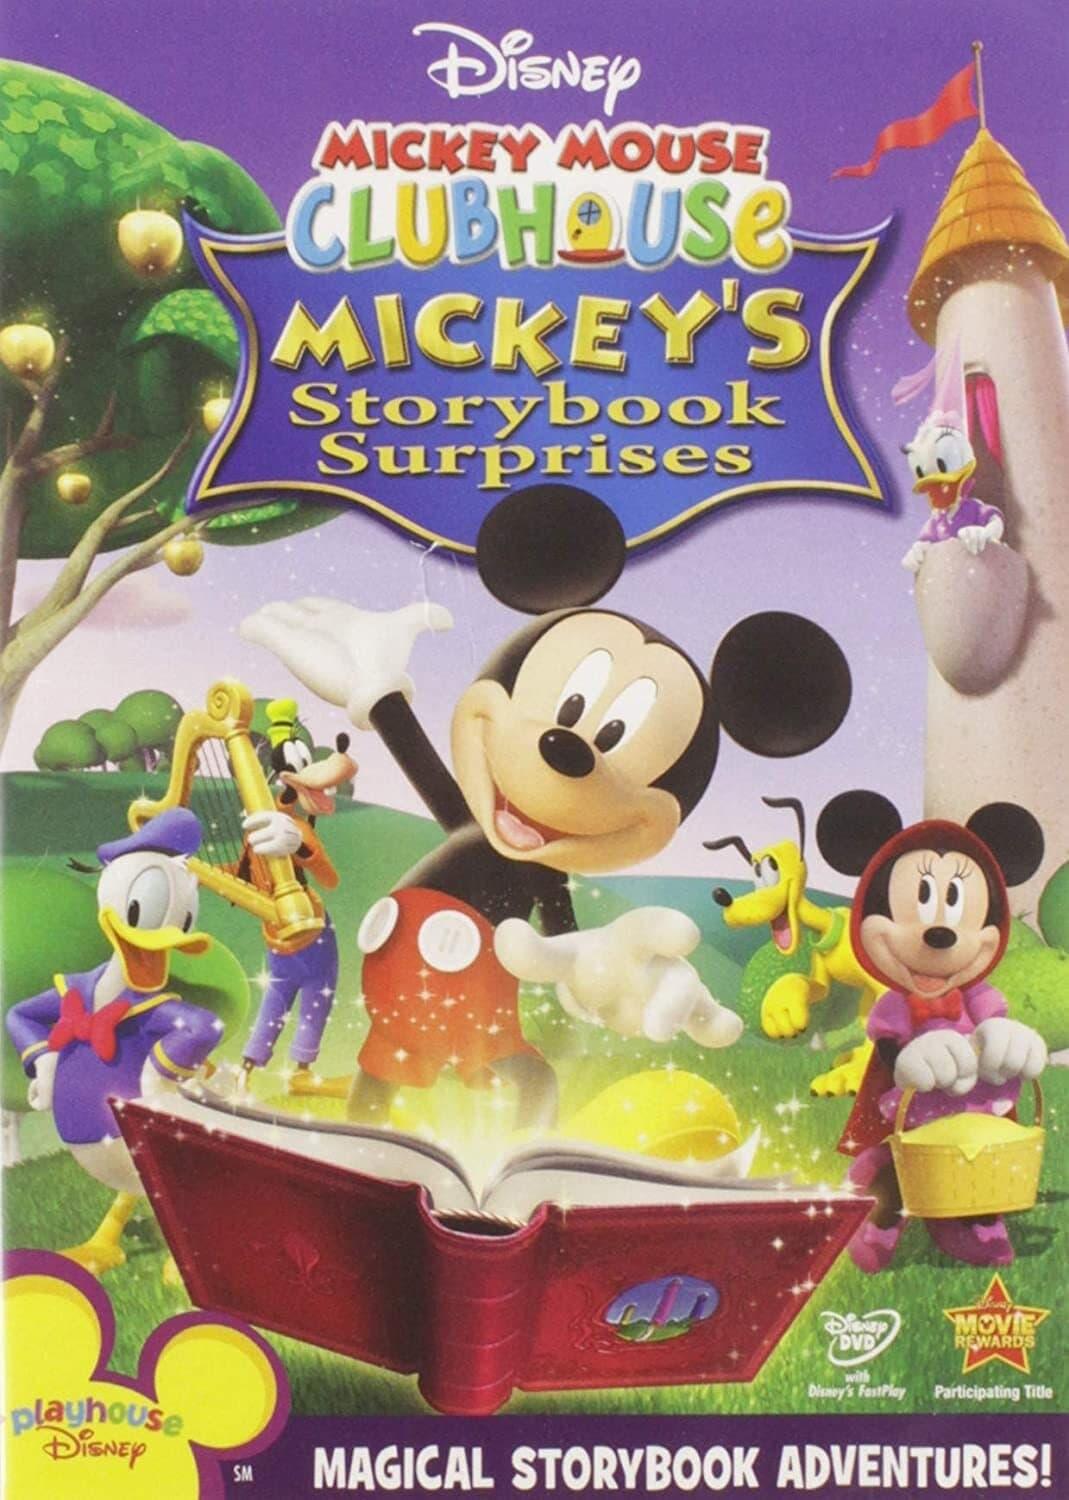 Mickey Mouse Clubhouse: Mickey's Storybook Surprises poster